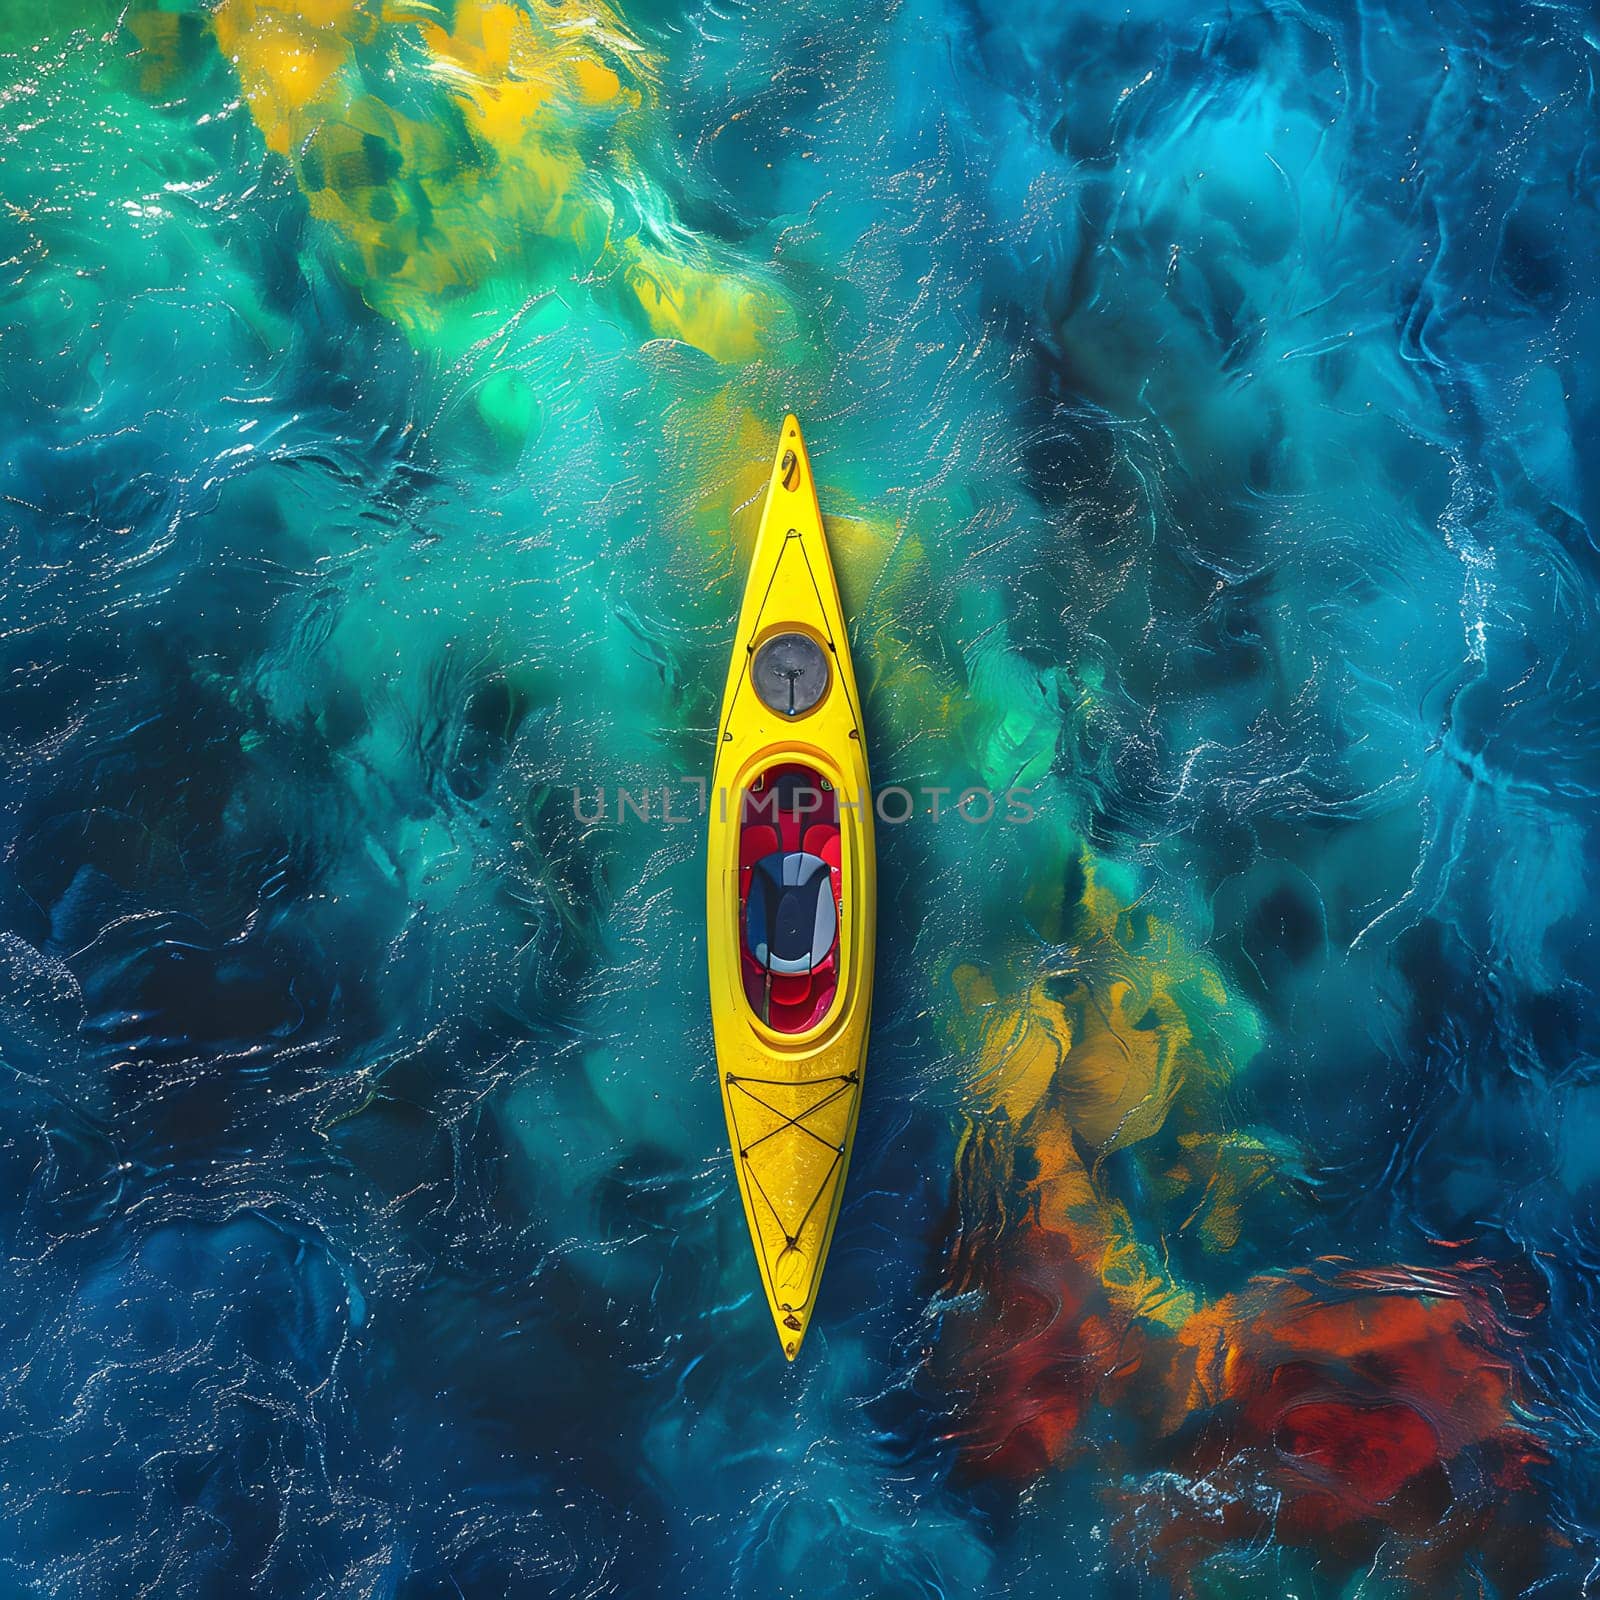 A vivid yellow kayak glides through the electric blue waters, resembling a piece of art among the fluid marine biology. A fish with a fin swims gracefully underwater